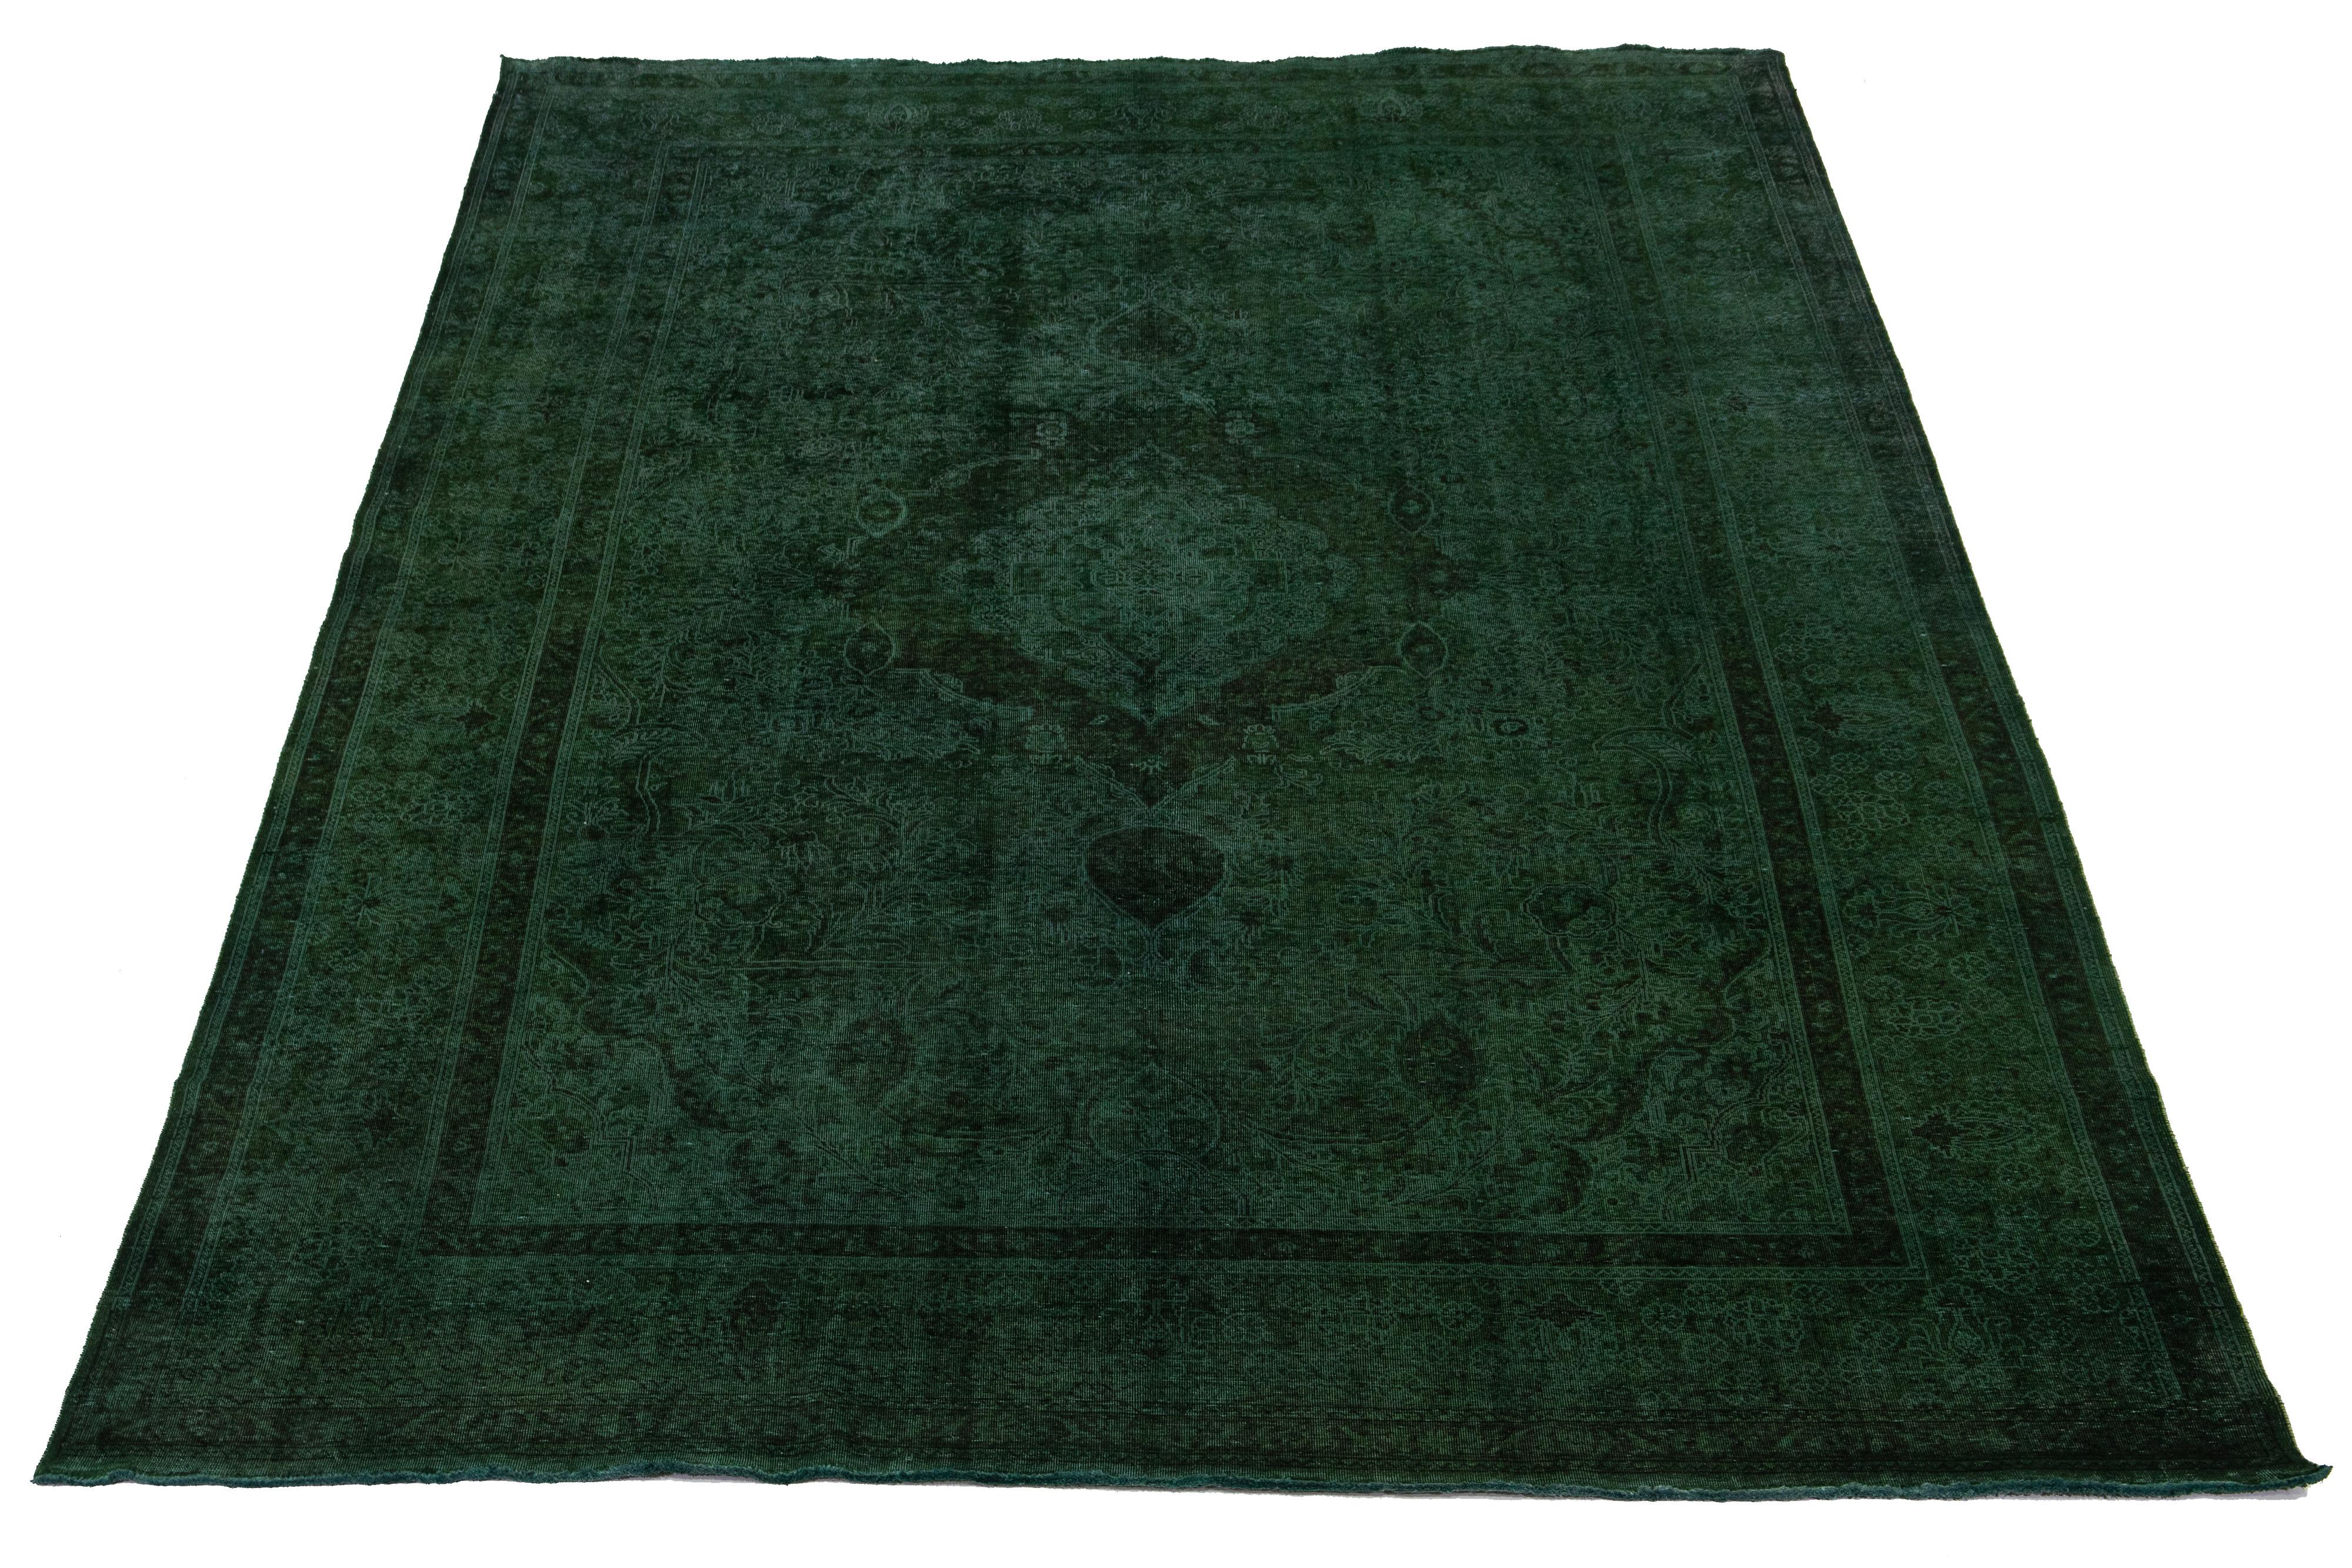 This is a vintage hand-knotted wool Persian rug with a green field. It features a medallion floral design with brown accents.

This rug measures 10'2'' x 15'9